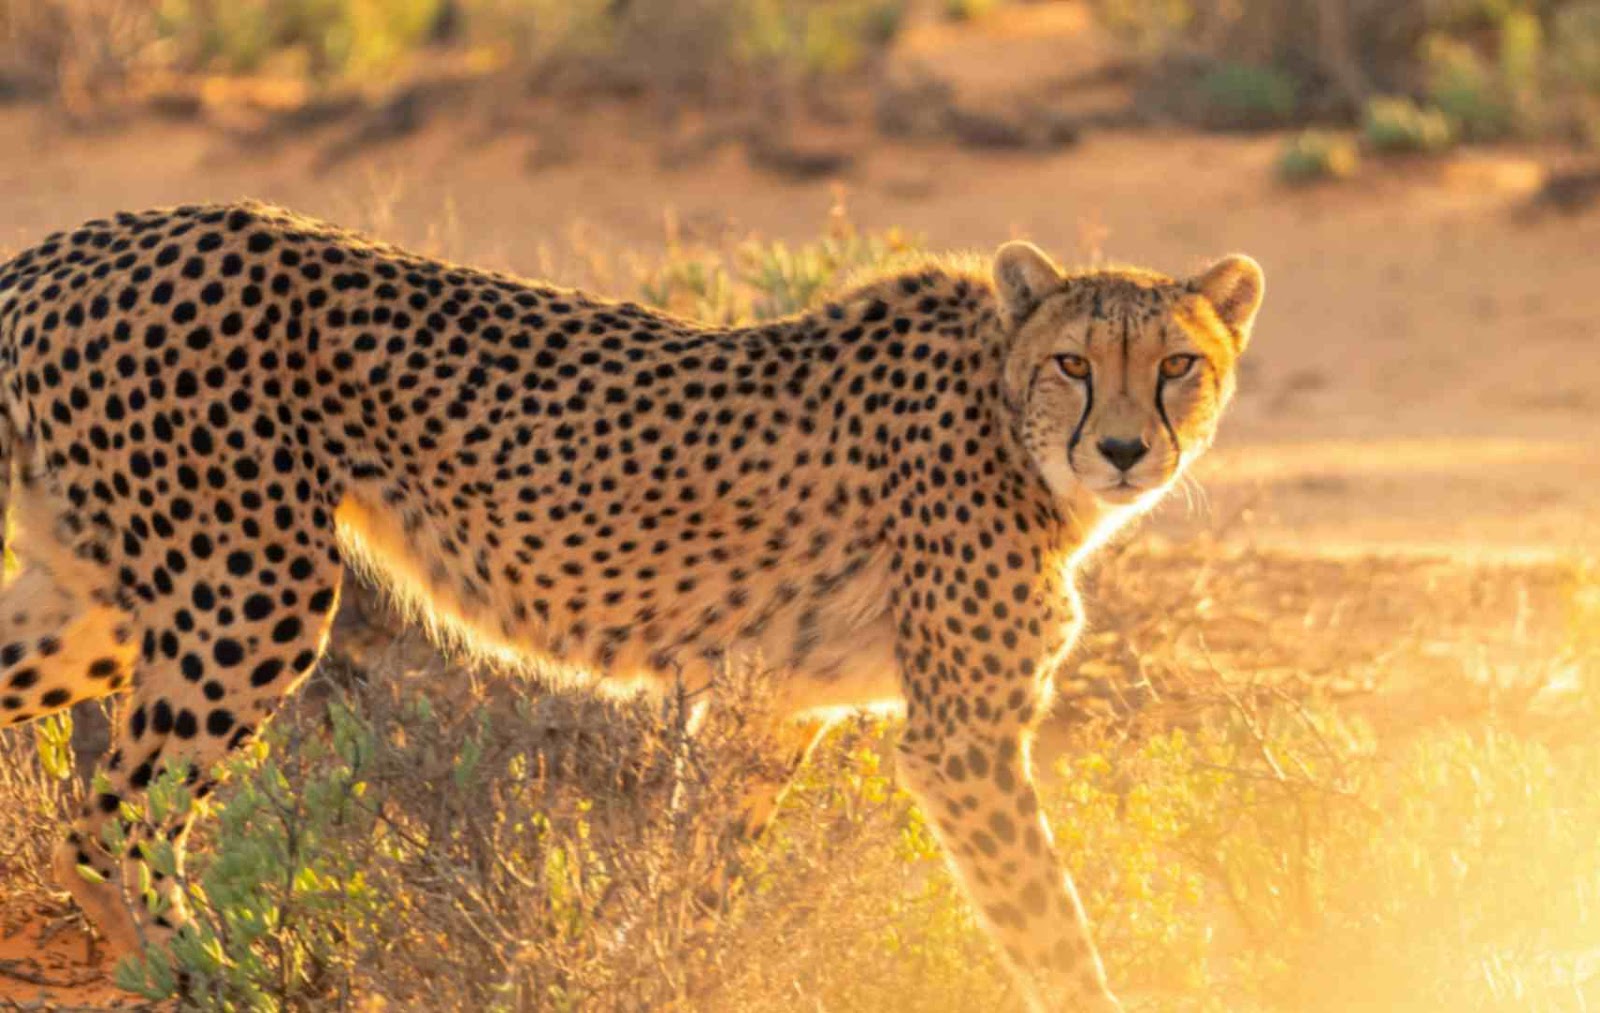 cheetah is one of the fastest animal on land at Chobe National Park. .